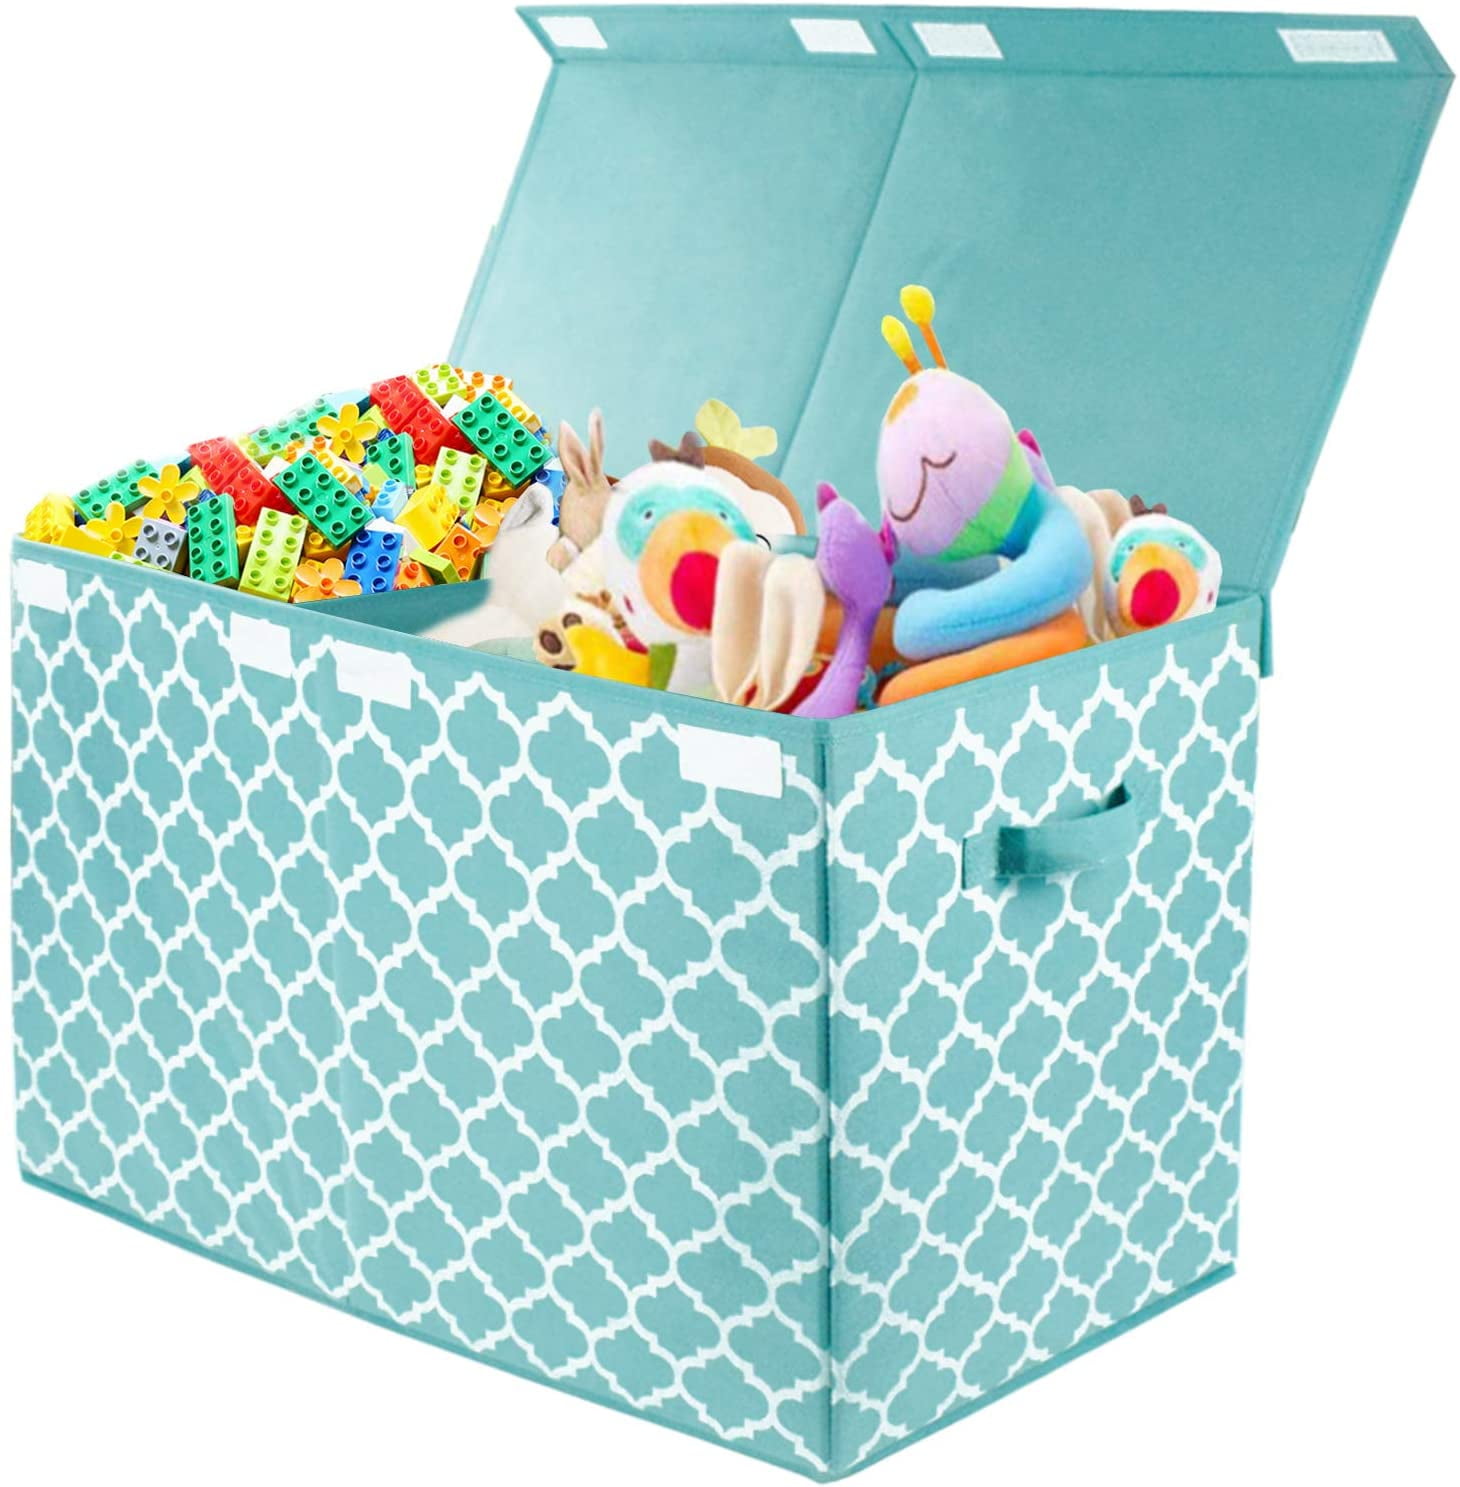 Fabric Basket Organiser Bins with Lids and Handles for Bedroom Children Blankets Large Toy Box Storage Black Foldable Kids Chest for Girls Plush Toys Nursery 62x33x40cm Clothes